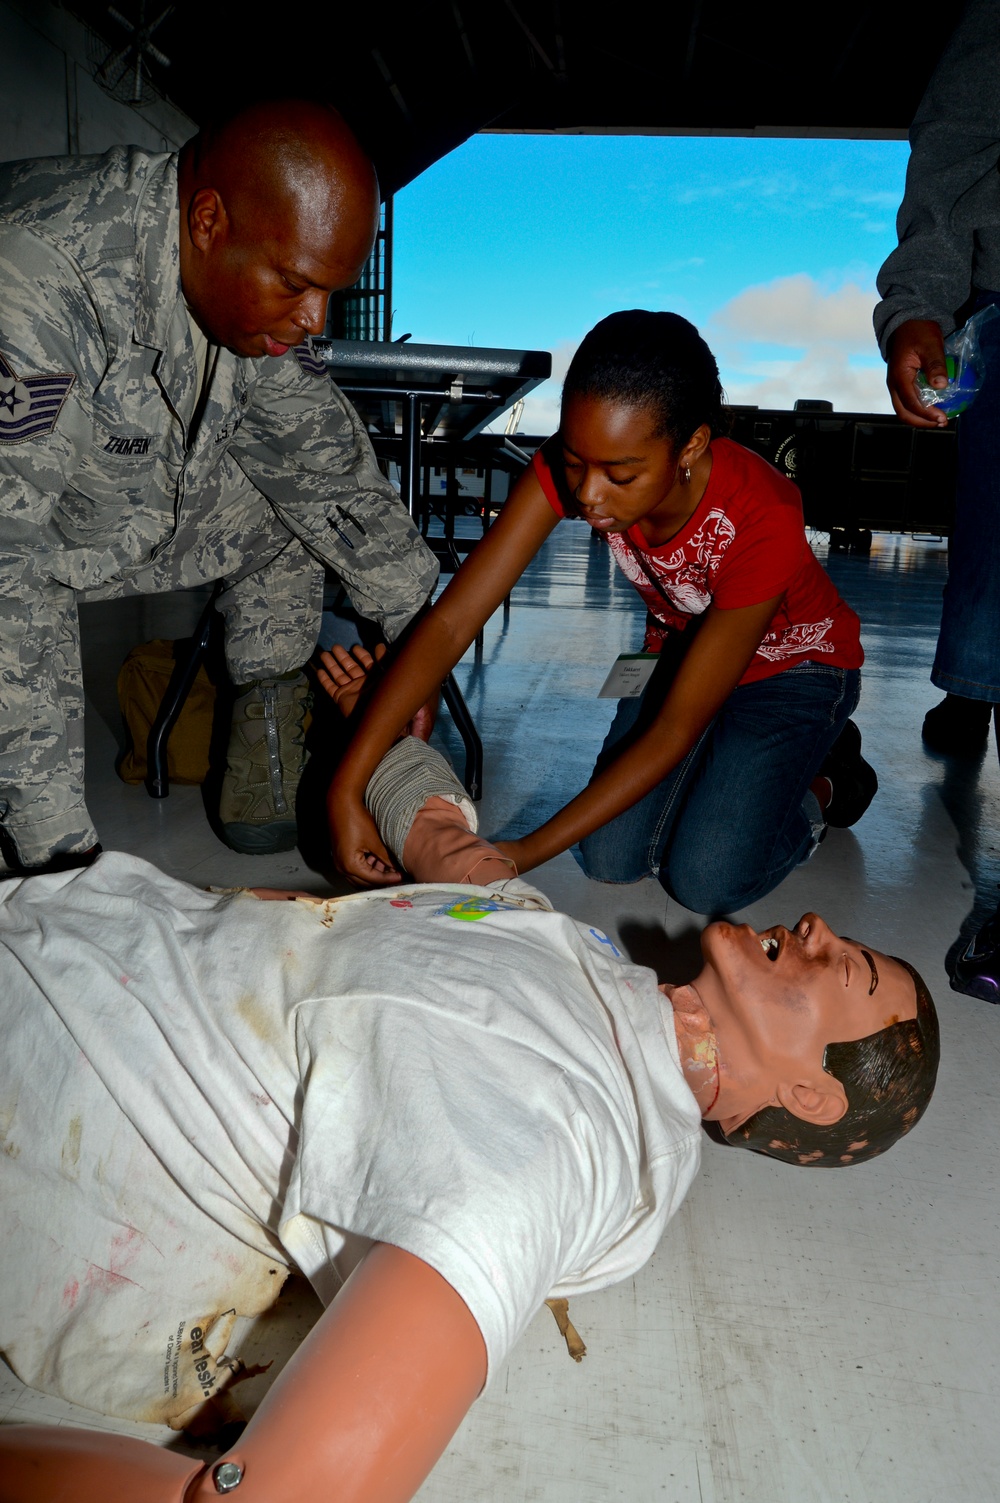 MacDill plays host to more than 250 youth